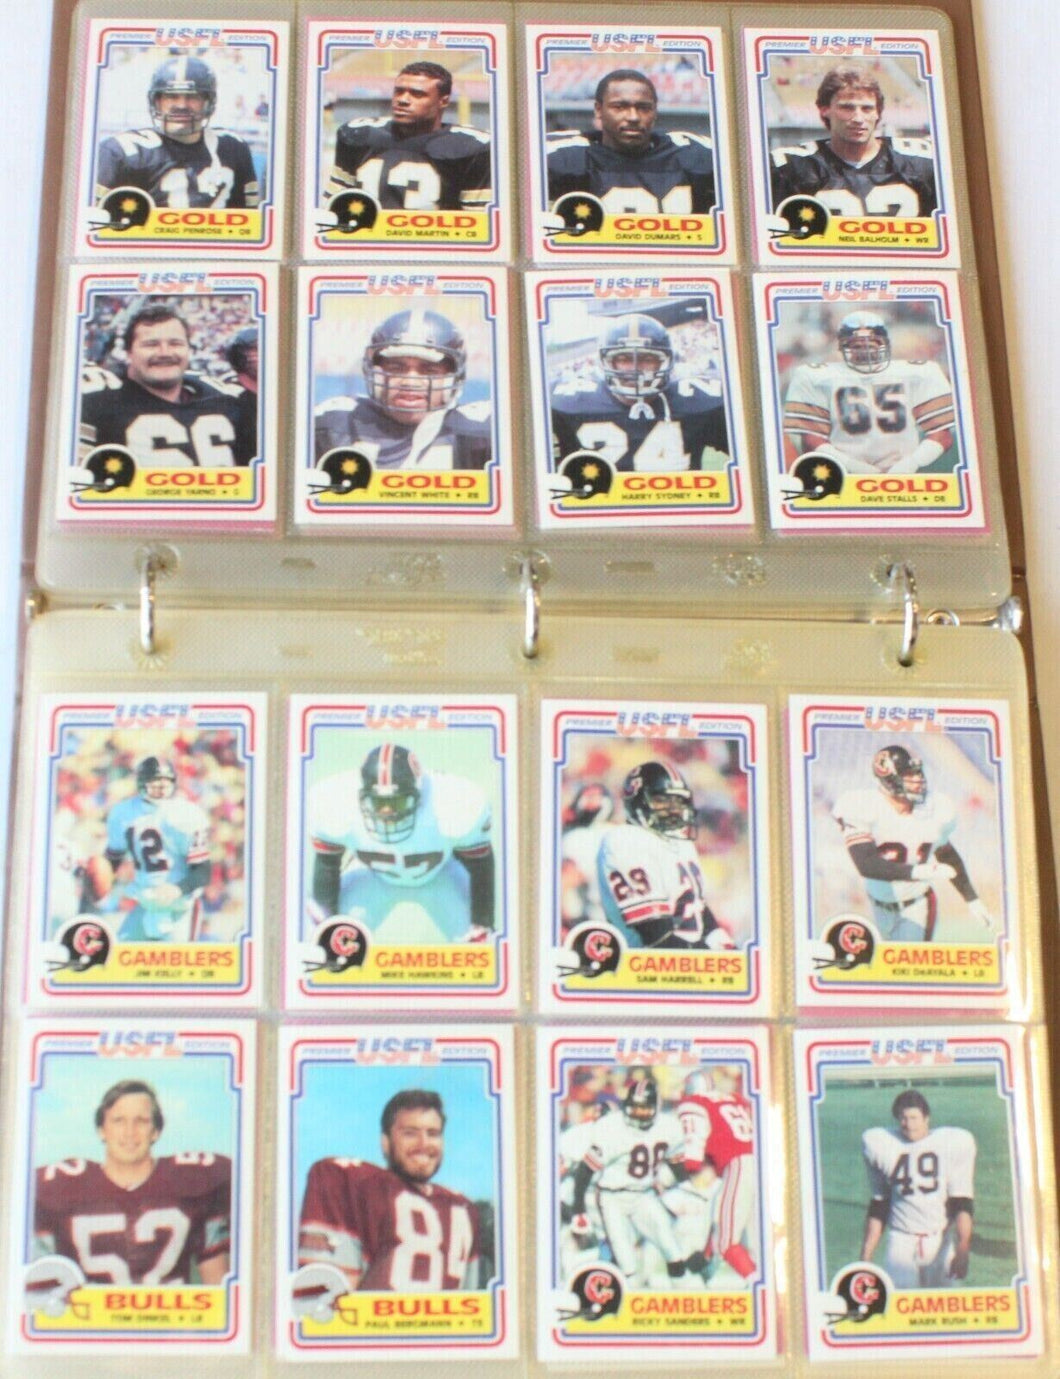 1984 Topps USFL Football Cards Complete  1-132 Set NM-MT Condition